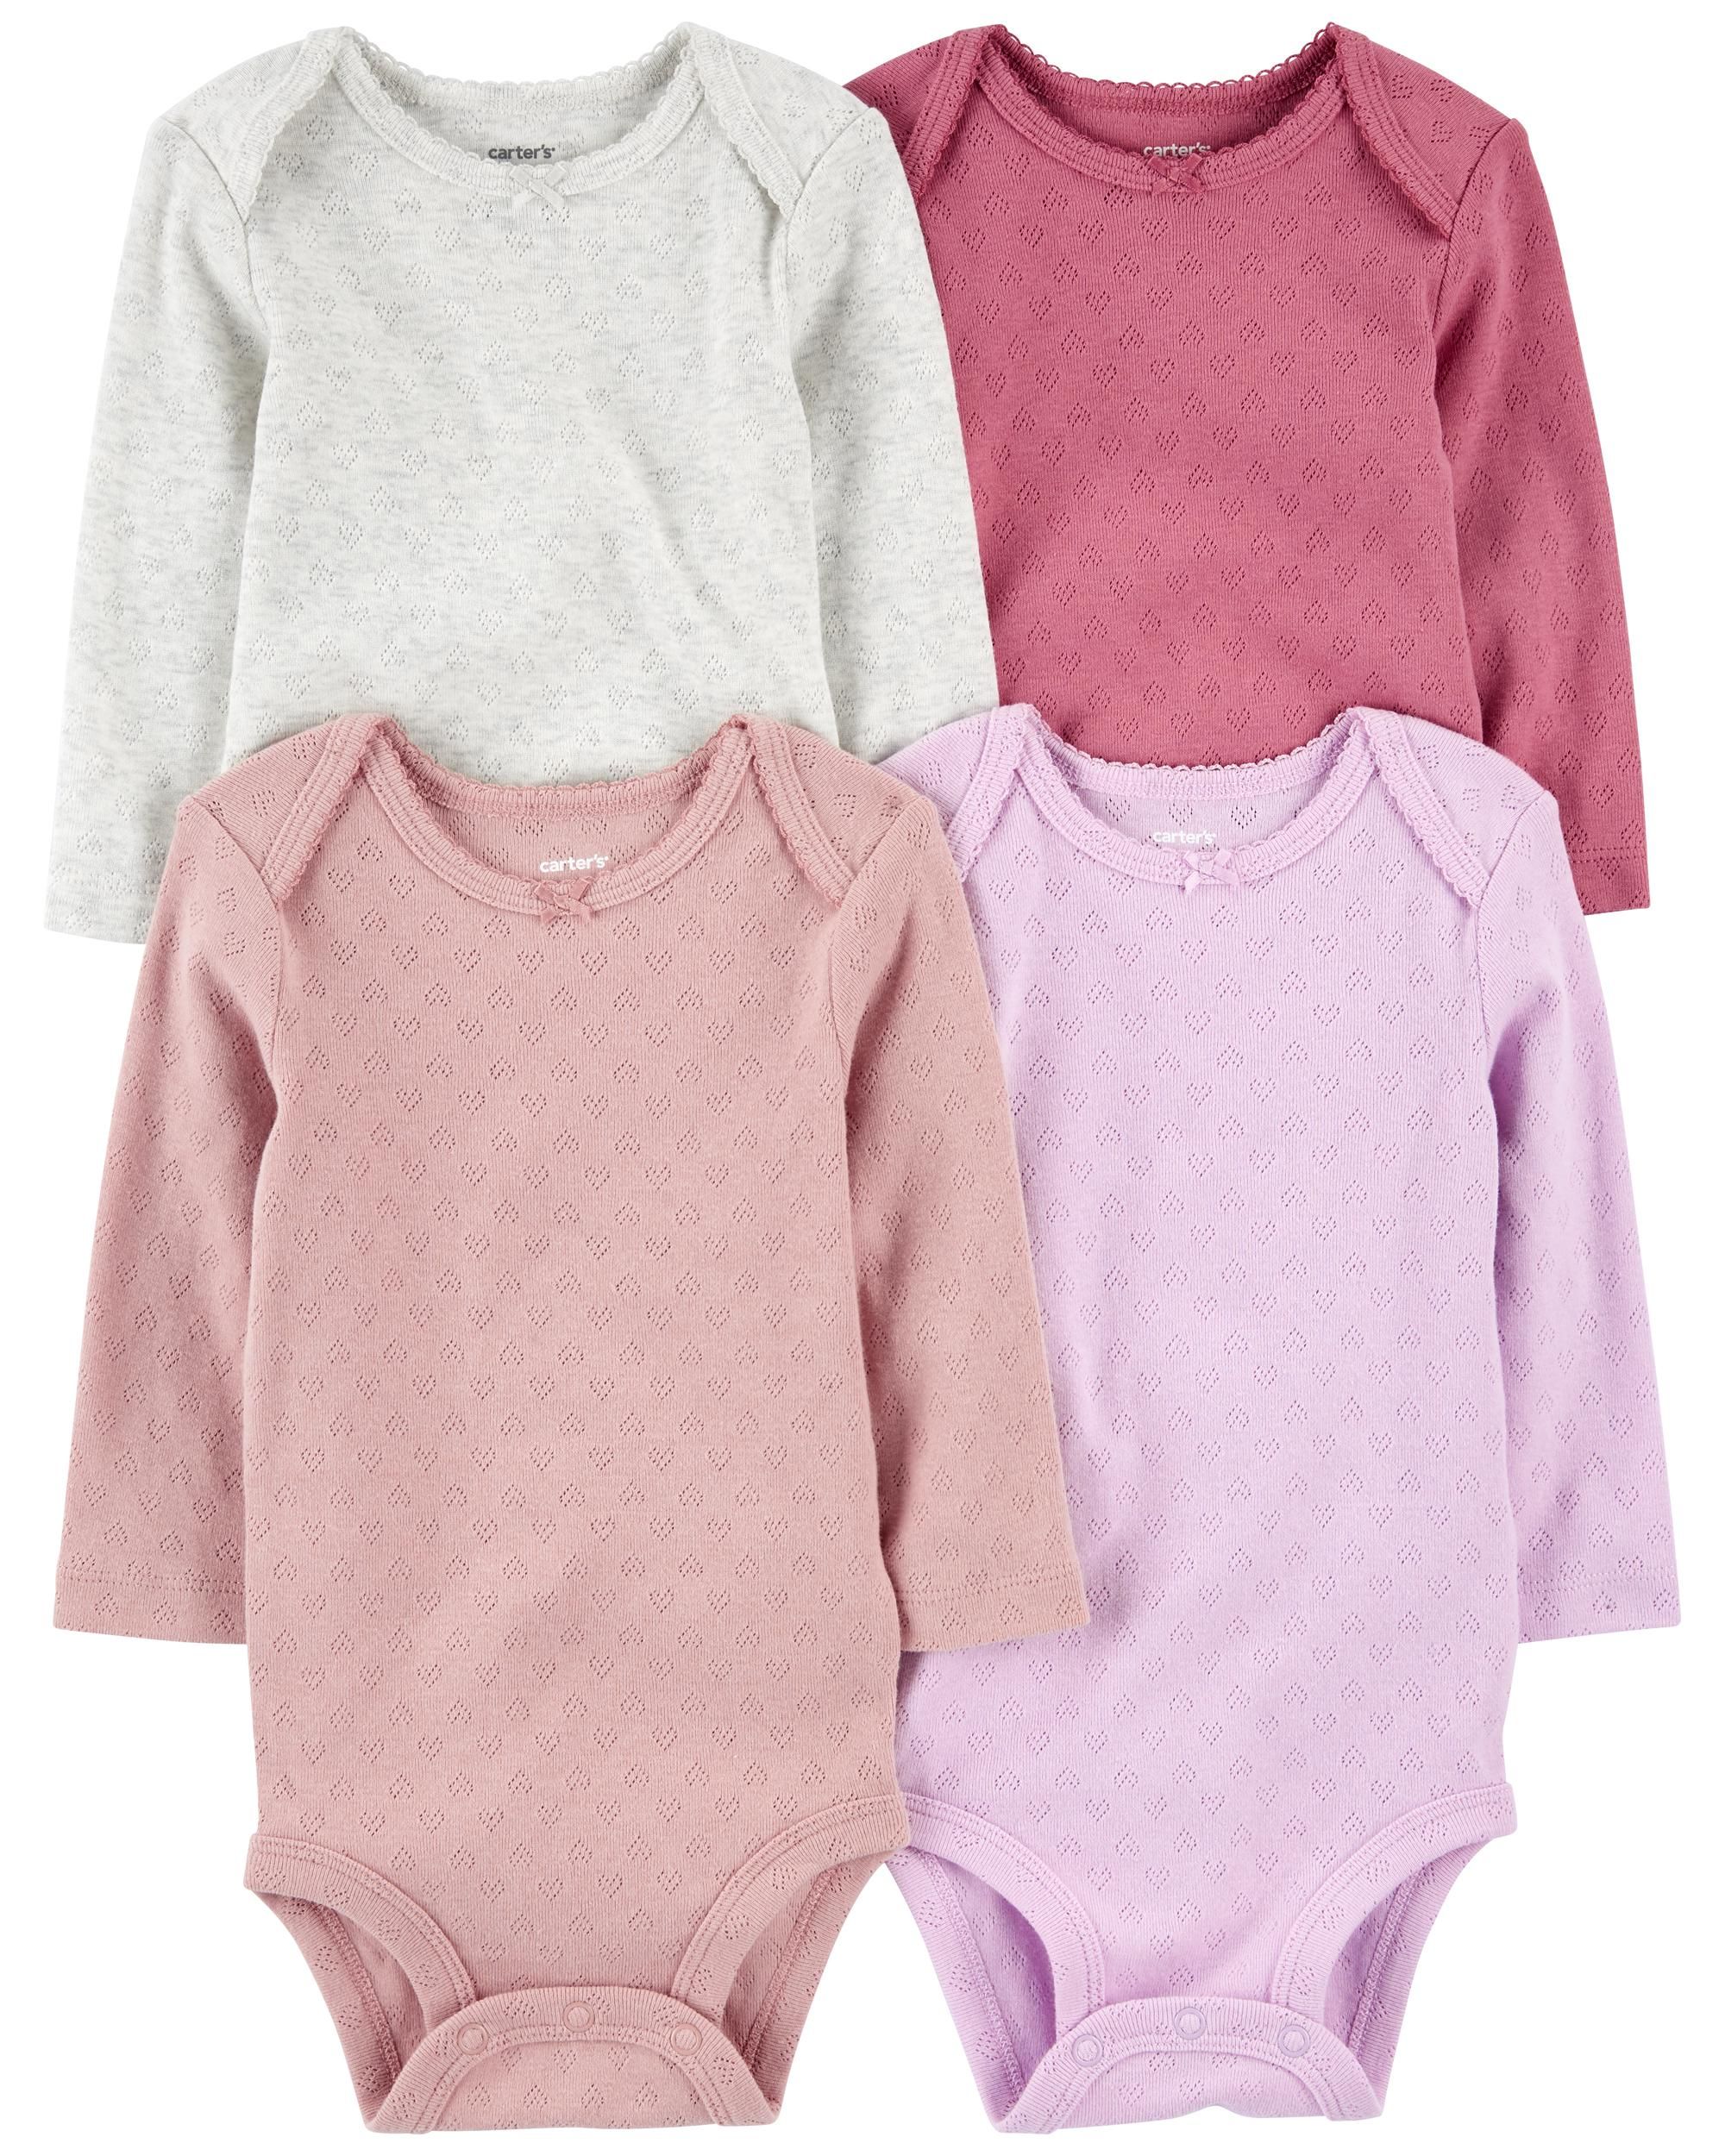 Baby 4-Pack Long-Sleeve Bodysuits | Carter's